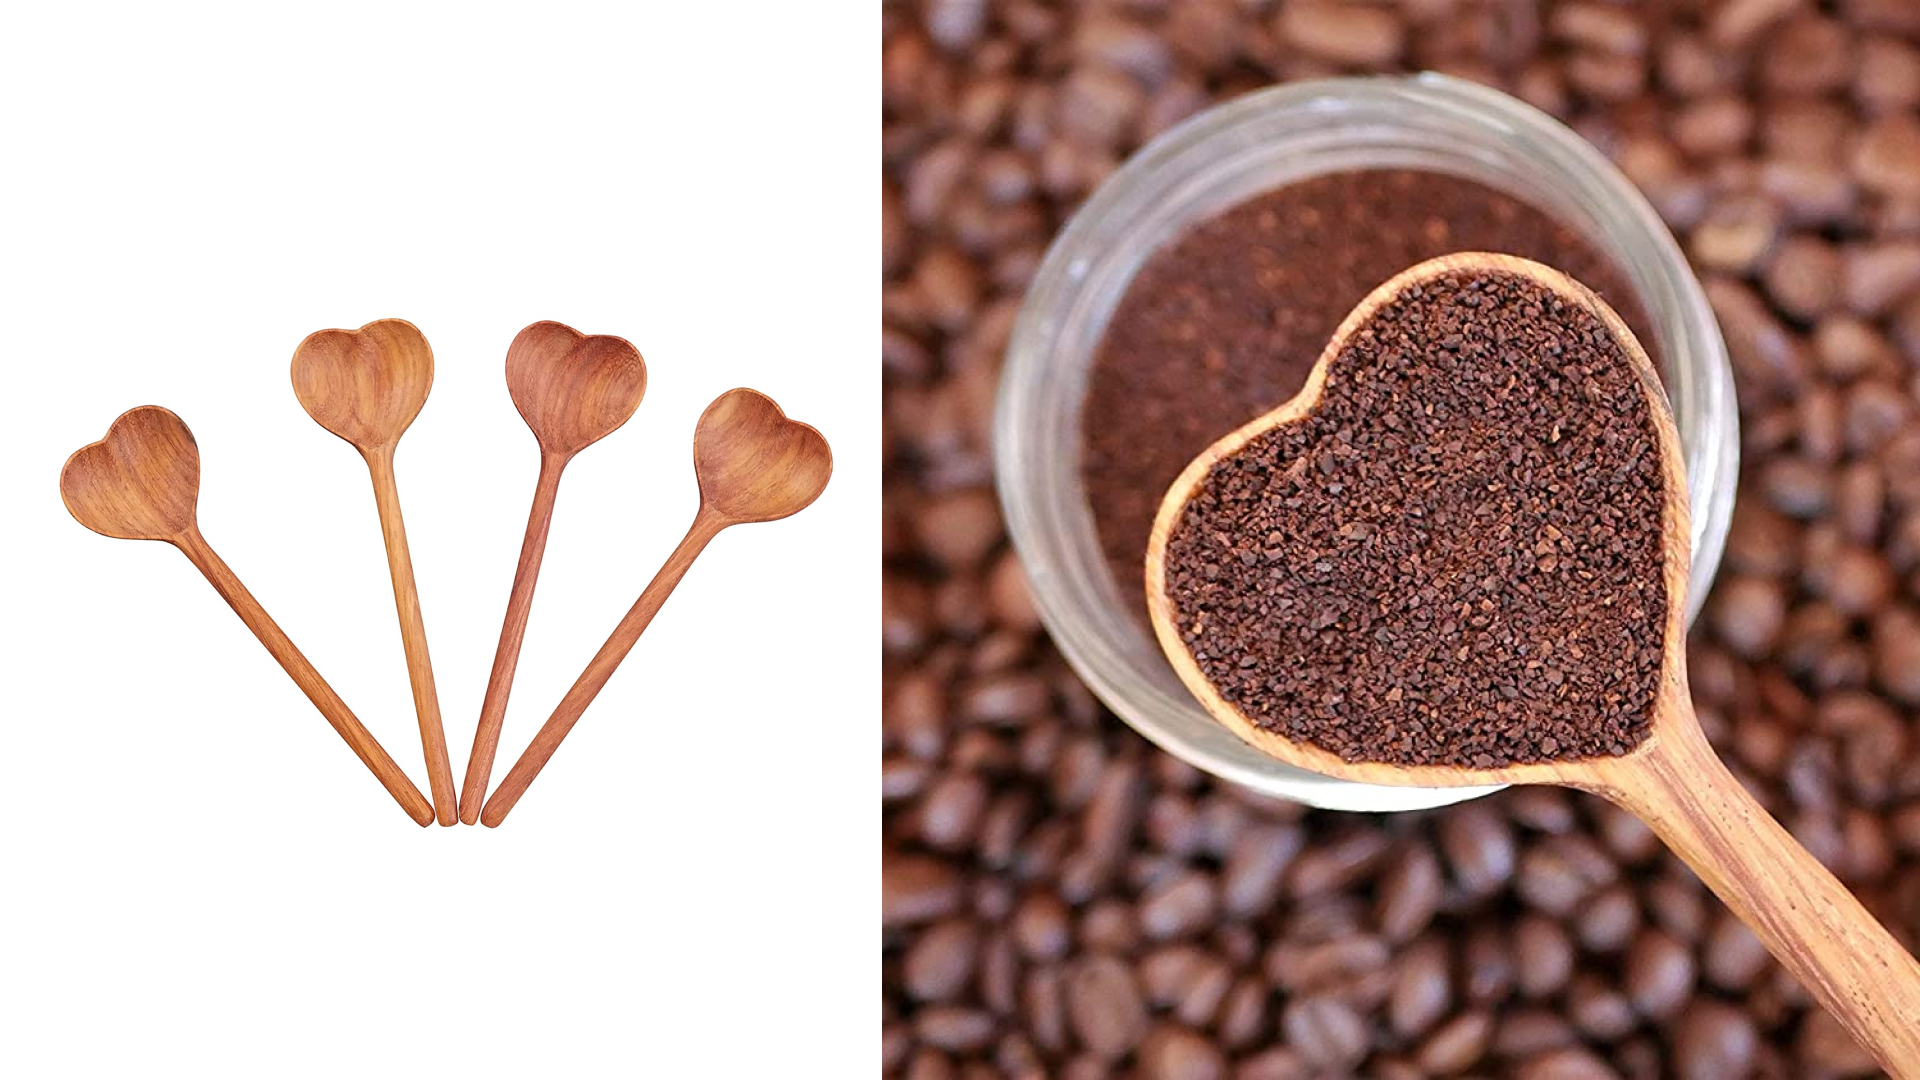 Heart-shaped wooden spoons